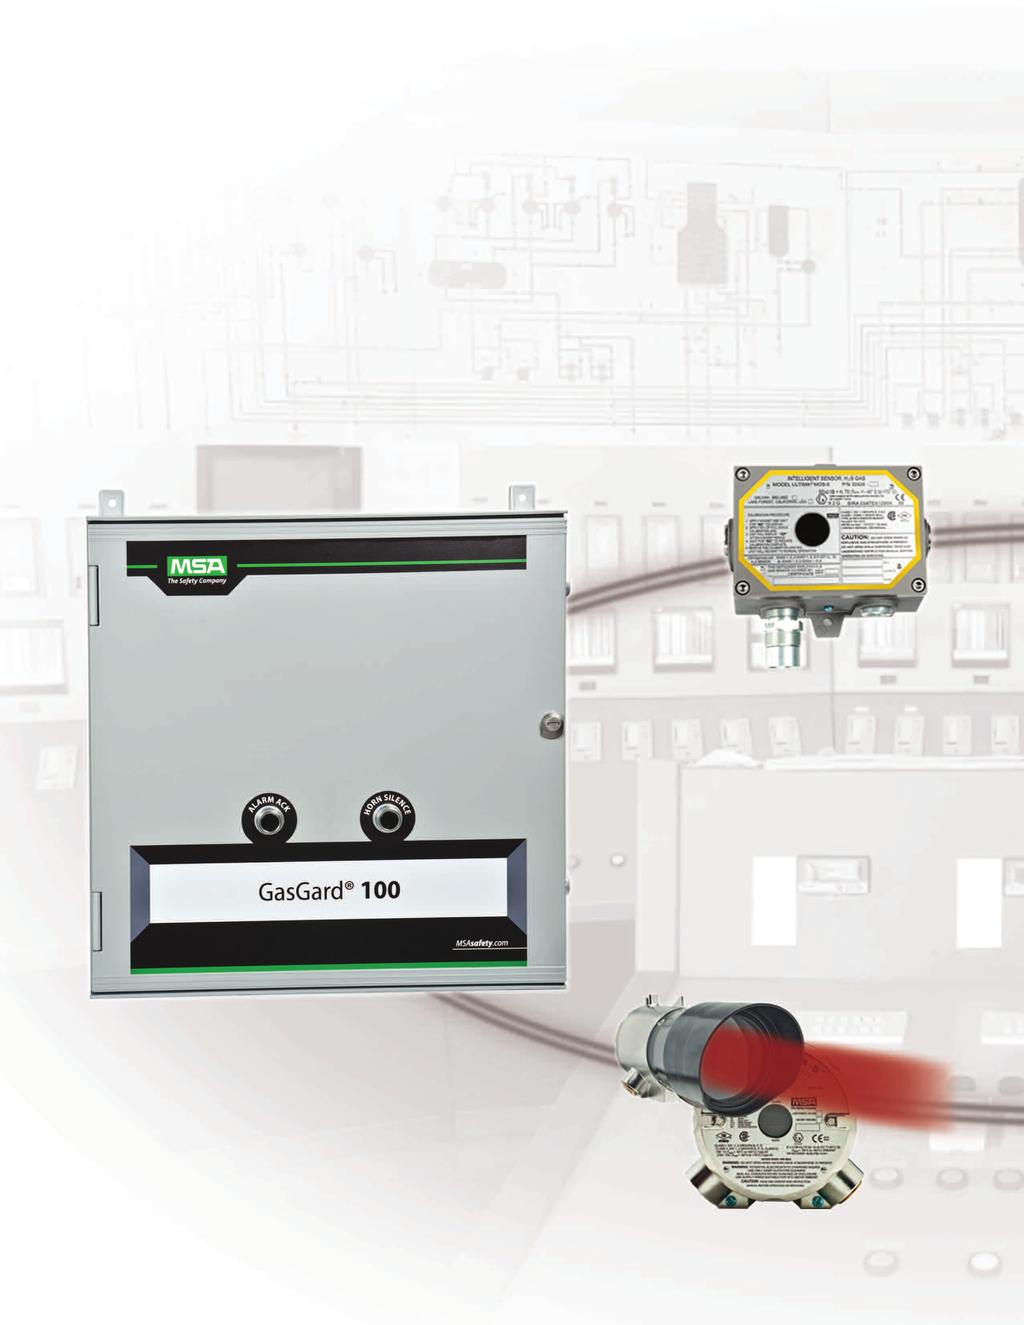 GasGard100 Control System Delivers Flexibility, Performance and Affordability with Standard Configurations or Customization The GasGard 100 Control System delivers: A seamless integration A scalable